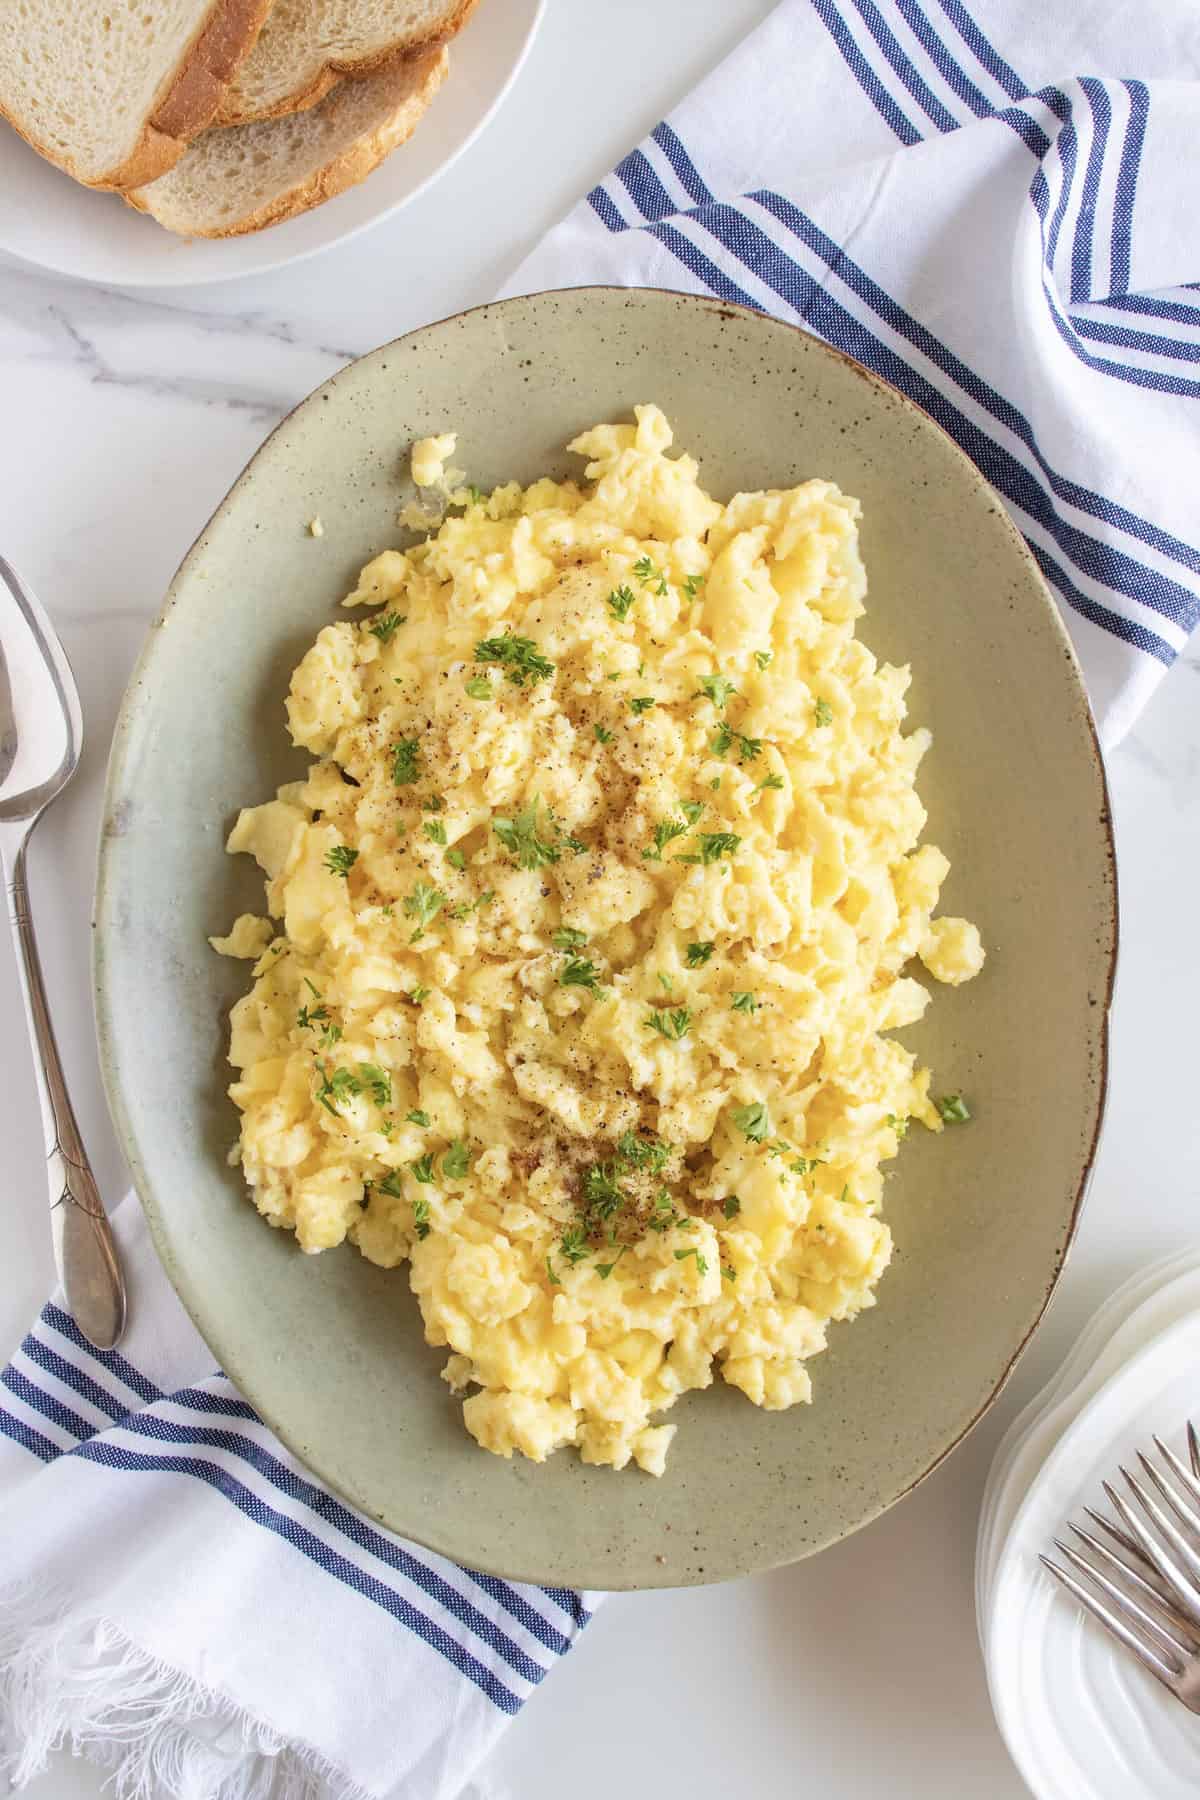 How to Soft Scramble Eggs by The BakerMama